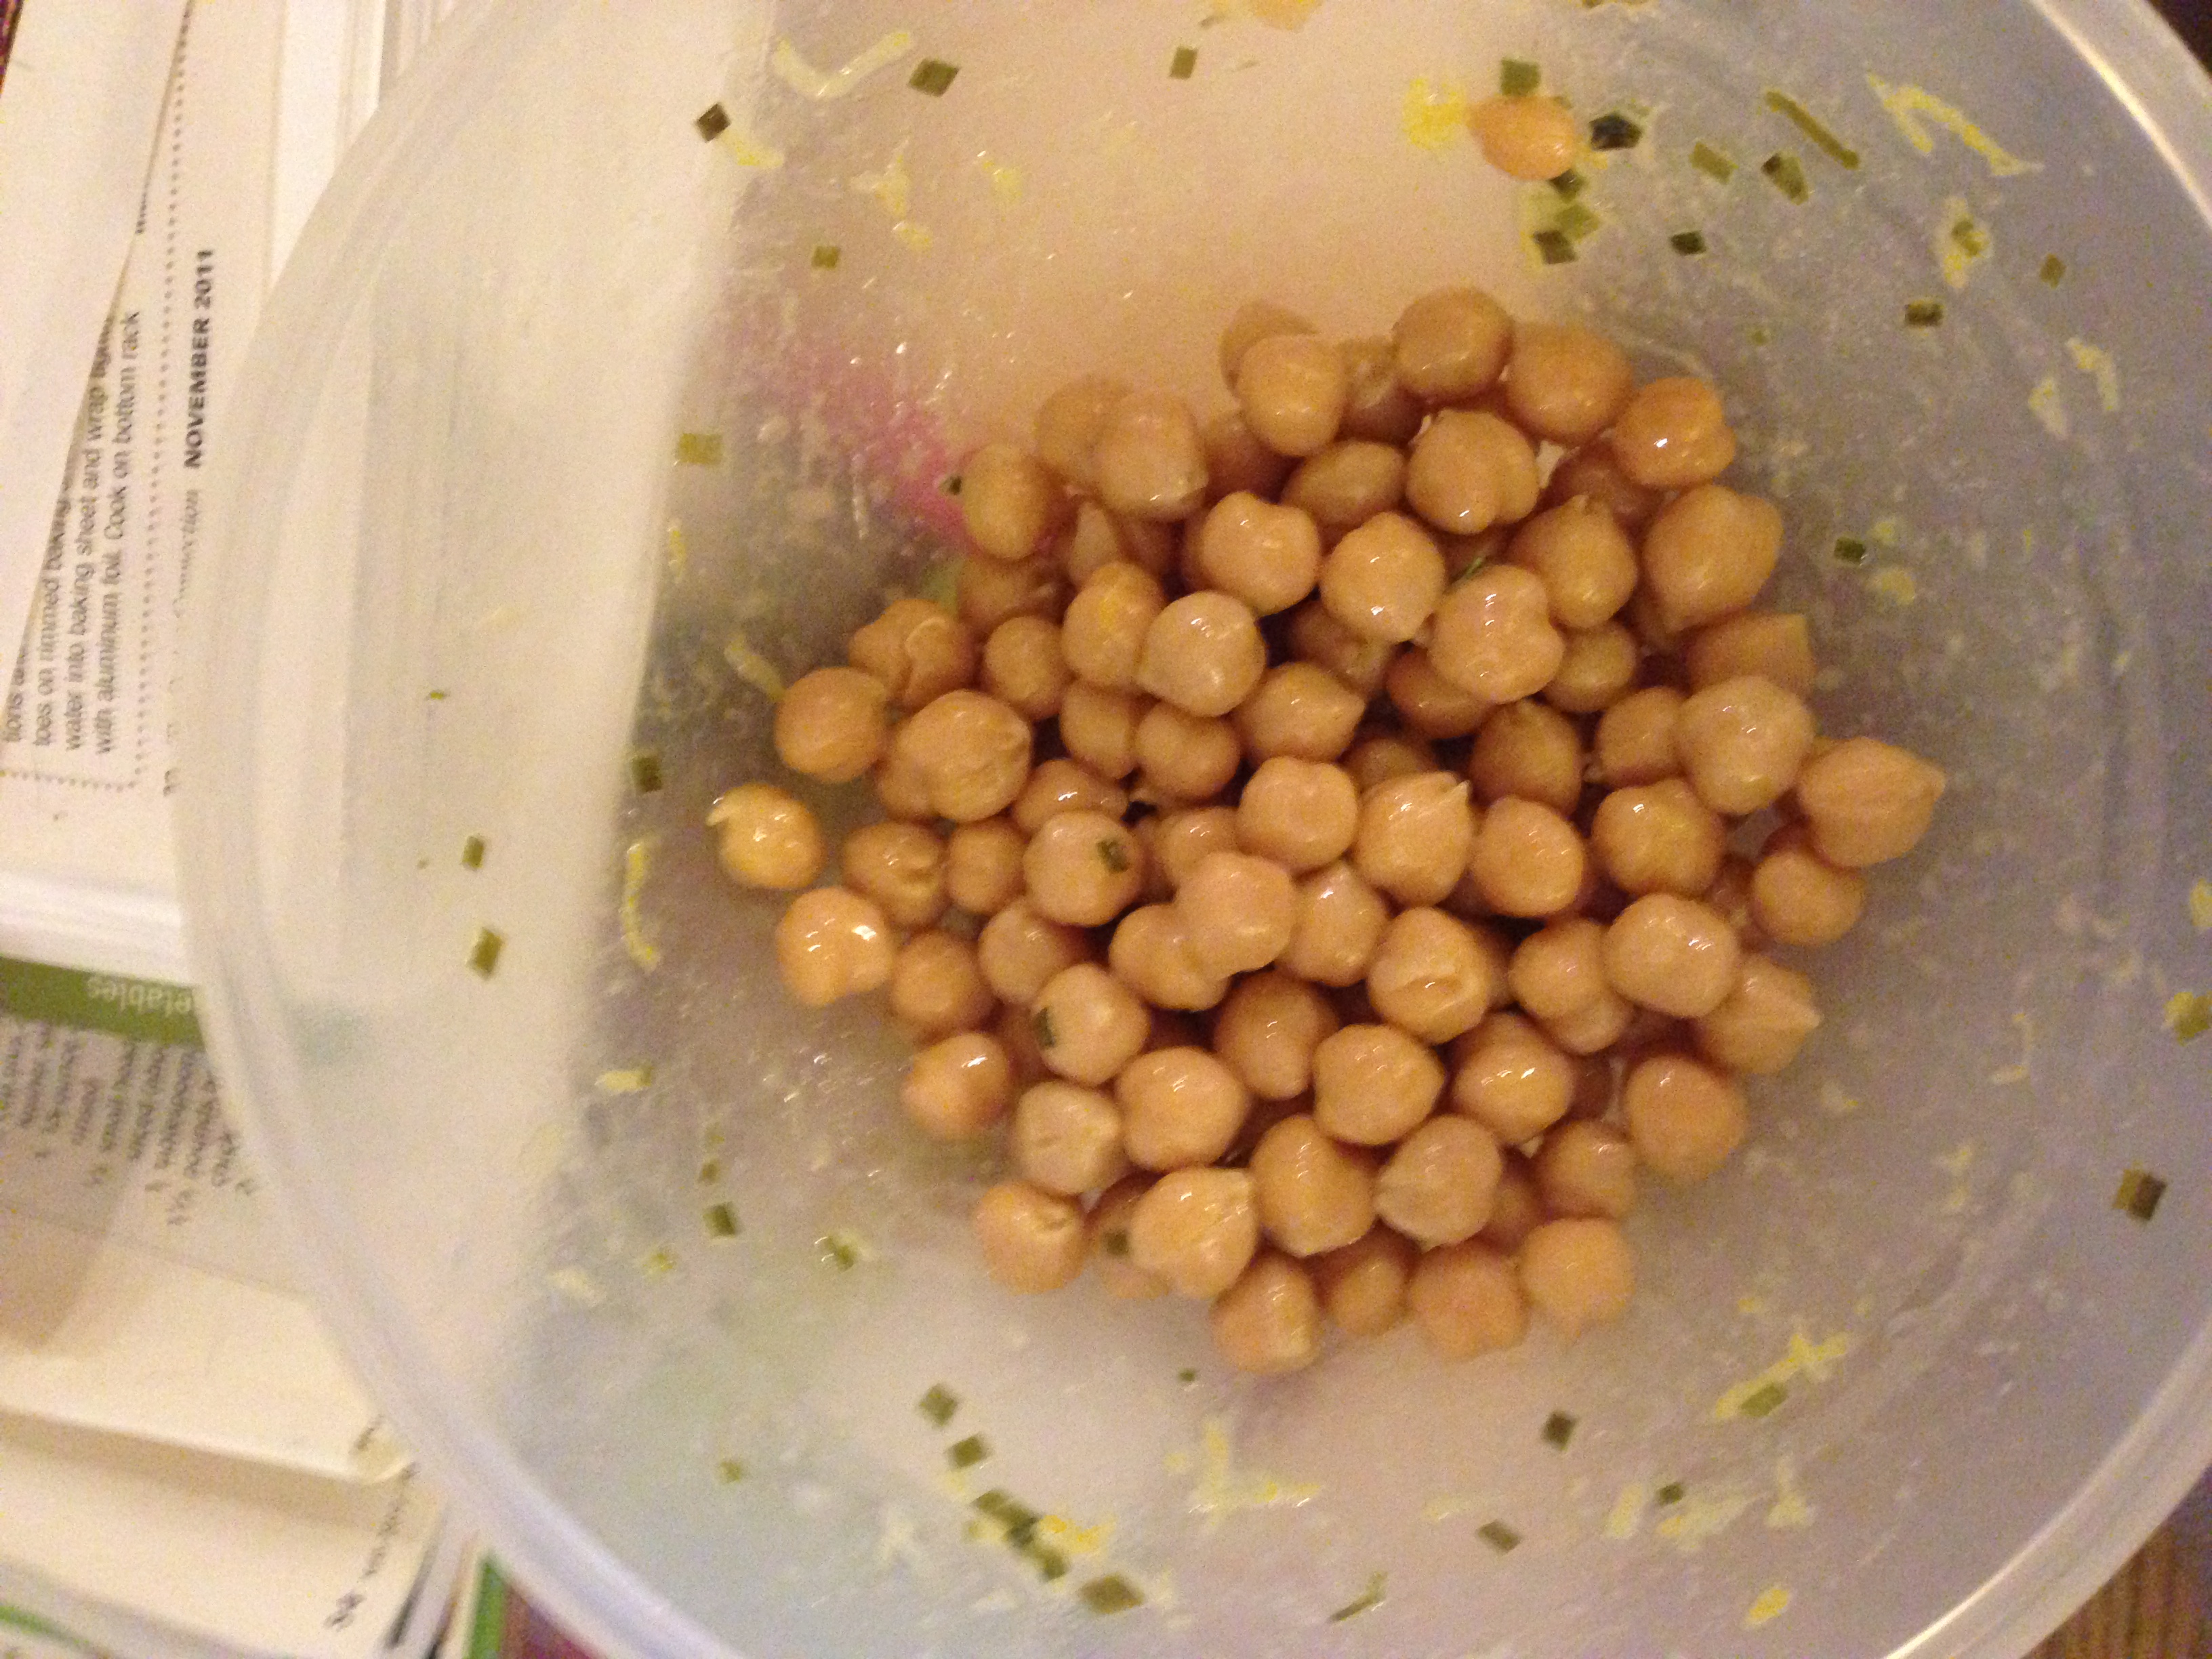 Chickpea salad with lemon and herbs